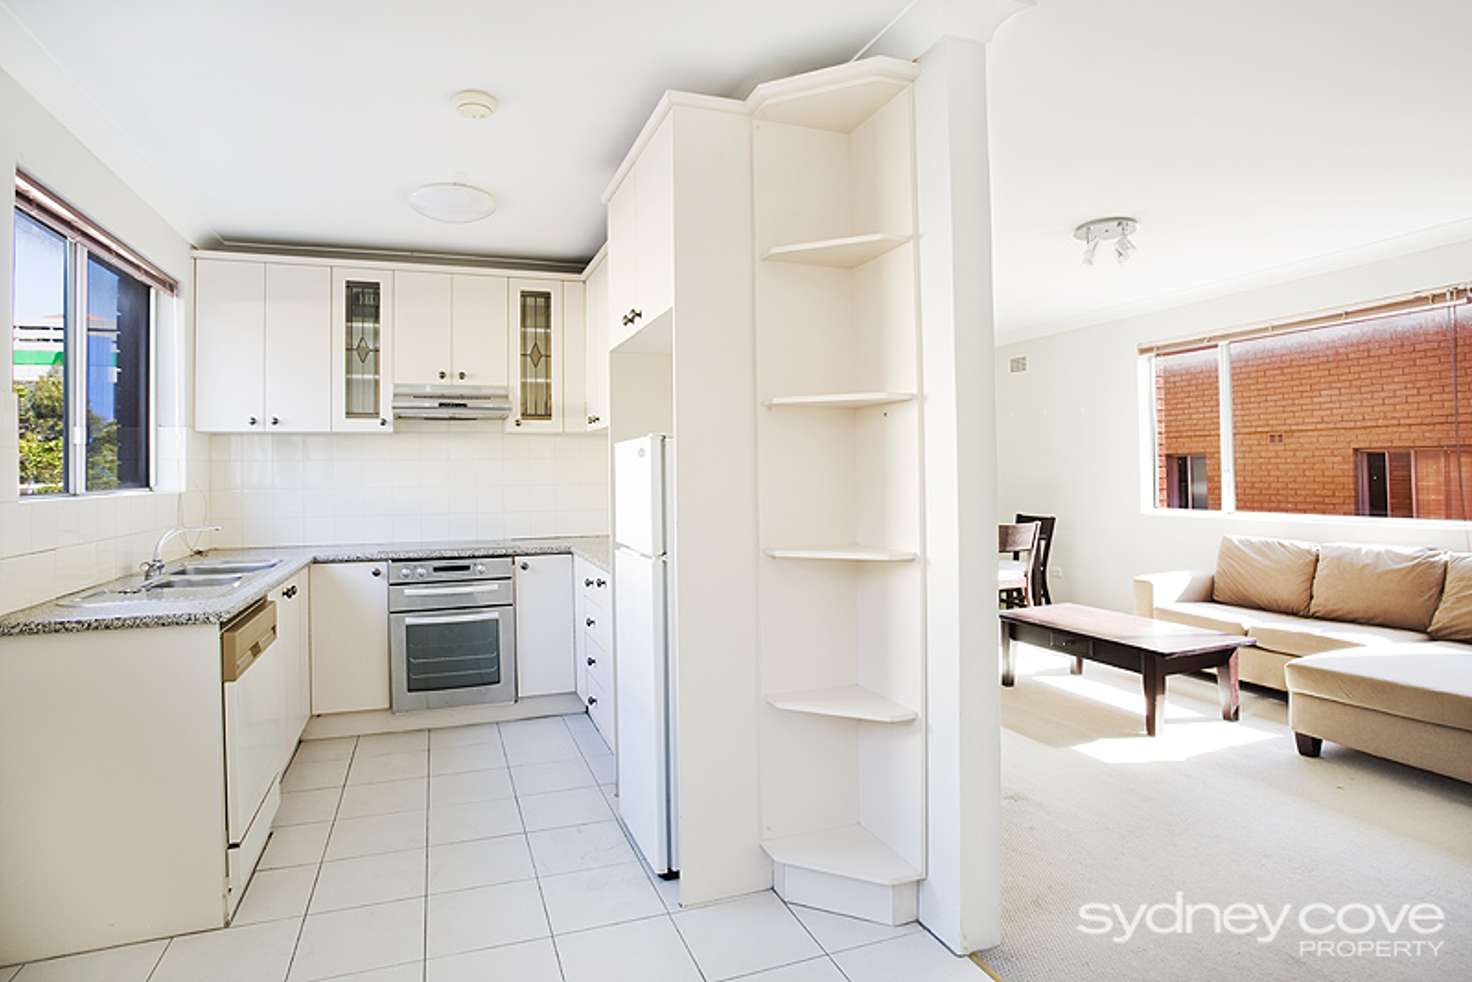 Main view of Homely apartment listing, 20 Blenheim St, Randwick NSW 2031